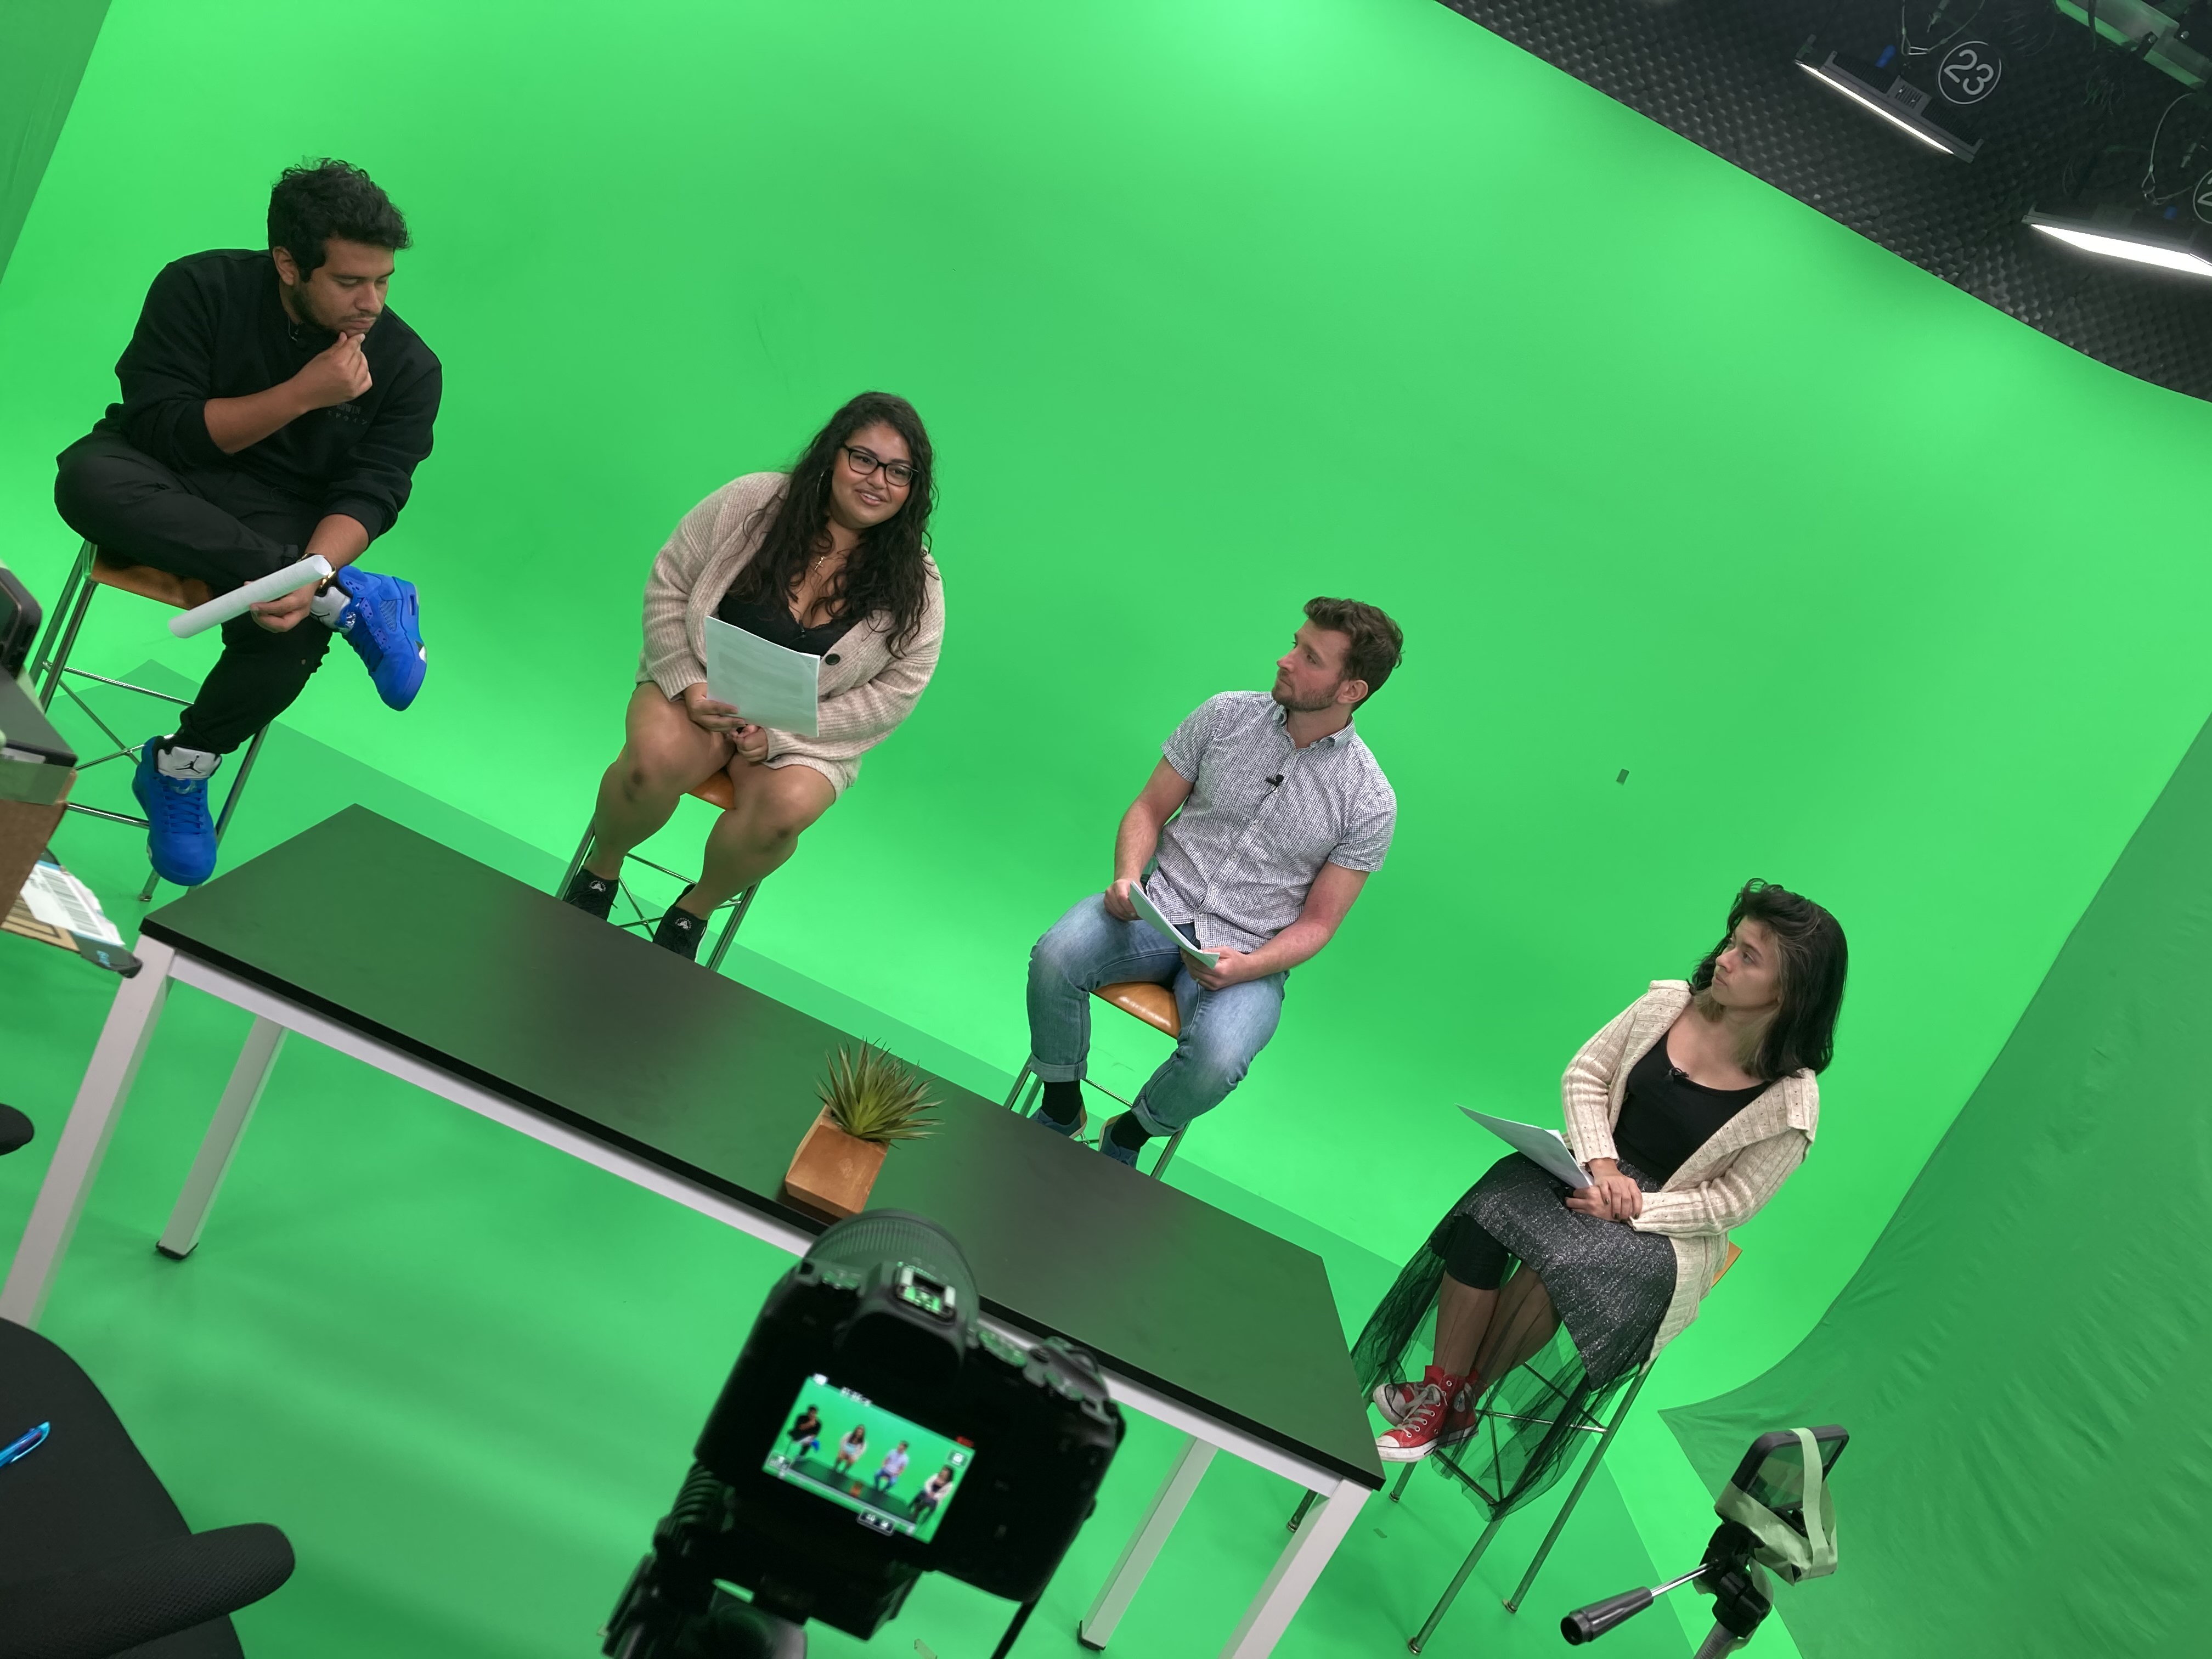 People sitting on stools in front of a green screen